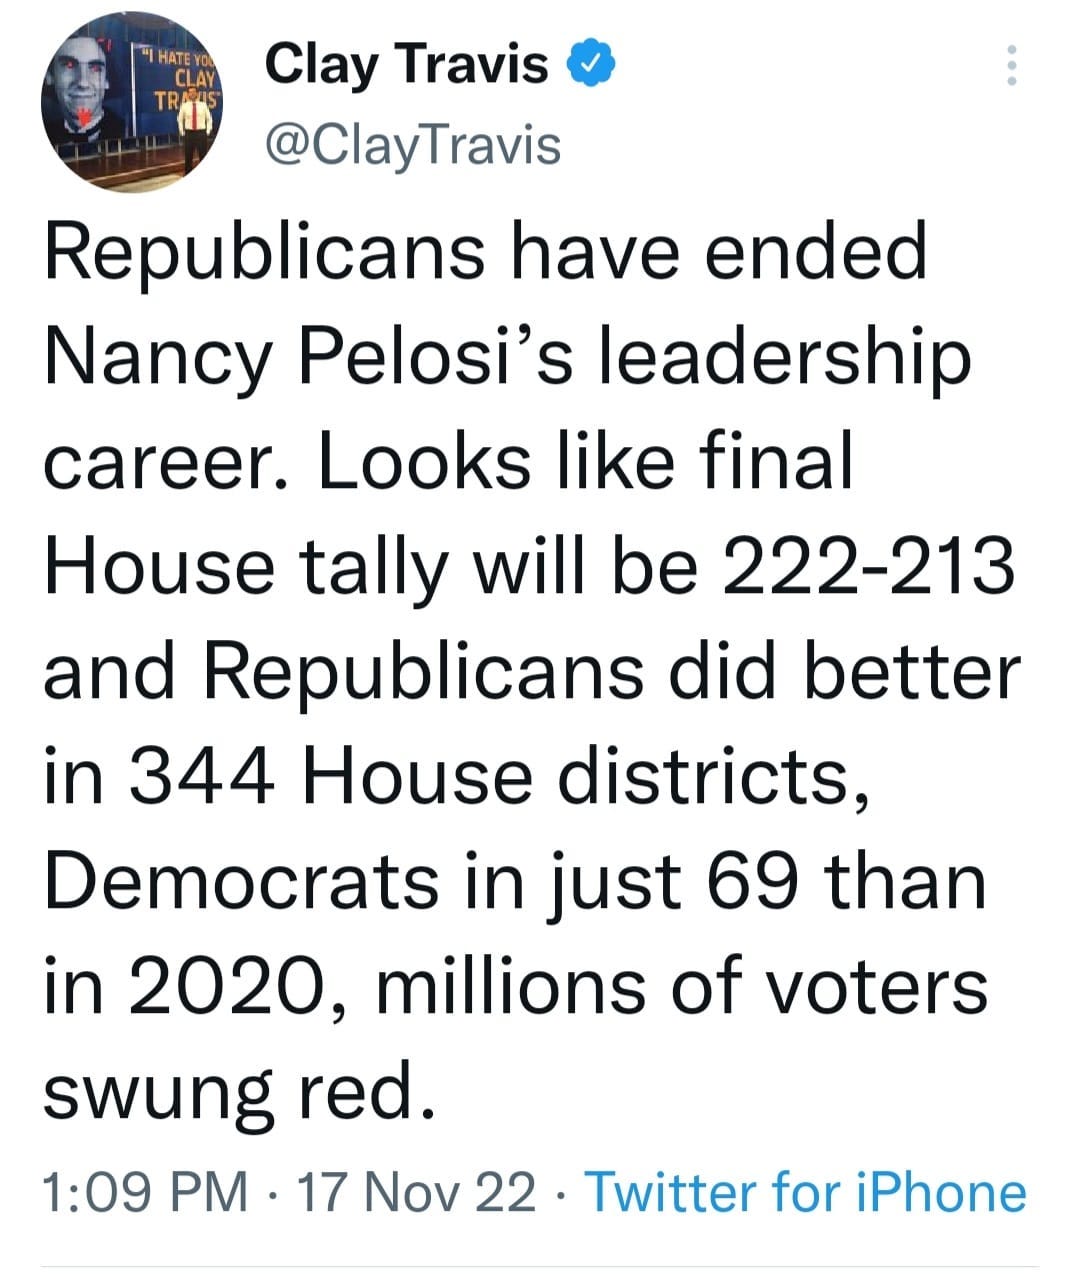 May be an image of 1 person and text that says 'Clay Travis @ClayTravis Republicans have ended Nancy Pelosi's leadership career. Looks like final House tally will be 222-213 and Republicans did better in 344 House districts, Democrats in just 69 than in 2020, millions of voters swung red. 1:09 PM 17 Nov 22. 22 Twitter for iPhone'